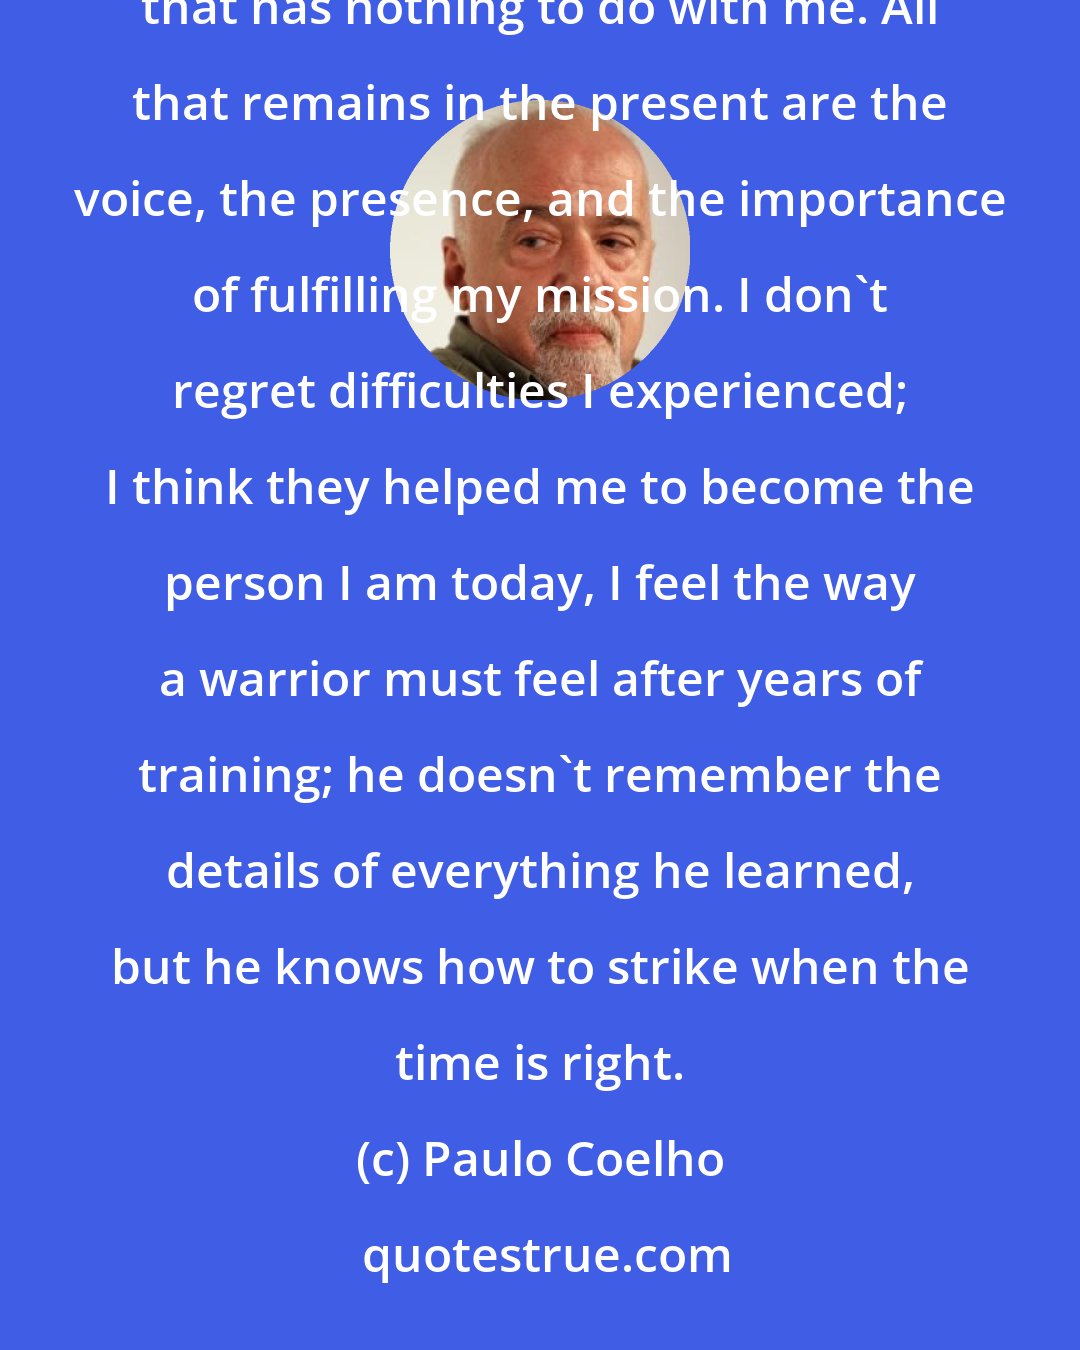 Paulo Coelho: It's not my story anymore: whenever I speak about the past now, I feel as if I were talking about something that has nothing to do with me. All that remains in the present are the voice, the presence, and the importance of fulfilling my mission. I don't regret difficulties I experienced; I think they helped me to become the person I am today, I feel the way a warrior must feel after years of training; he doesn't remember the details of everything he learned, but he knows how to strike when the time is right.